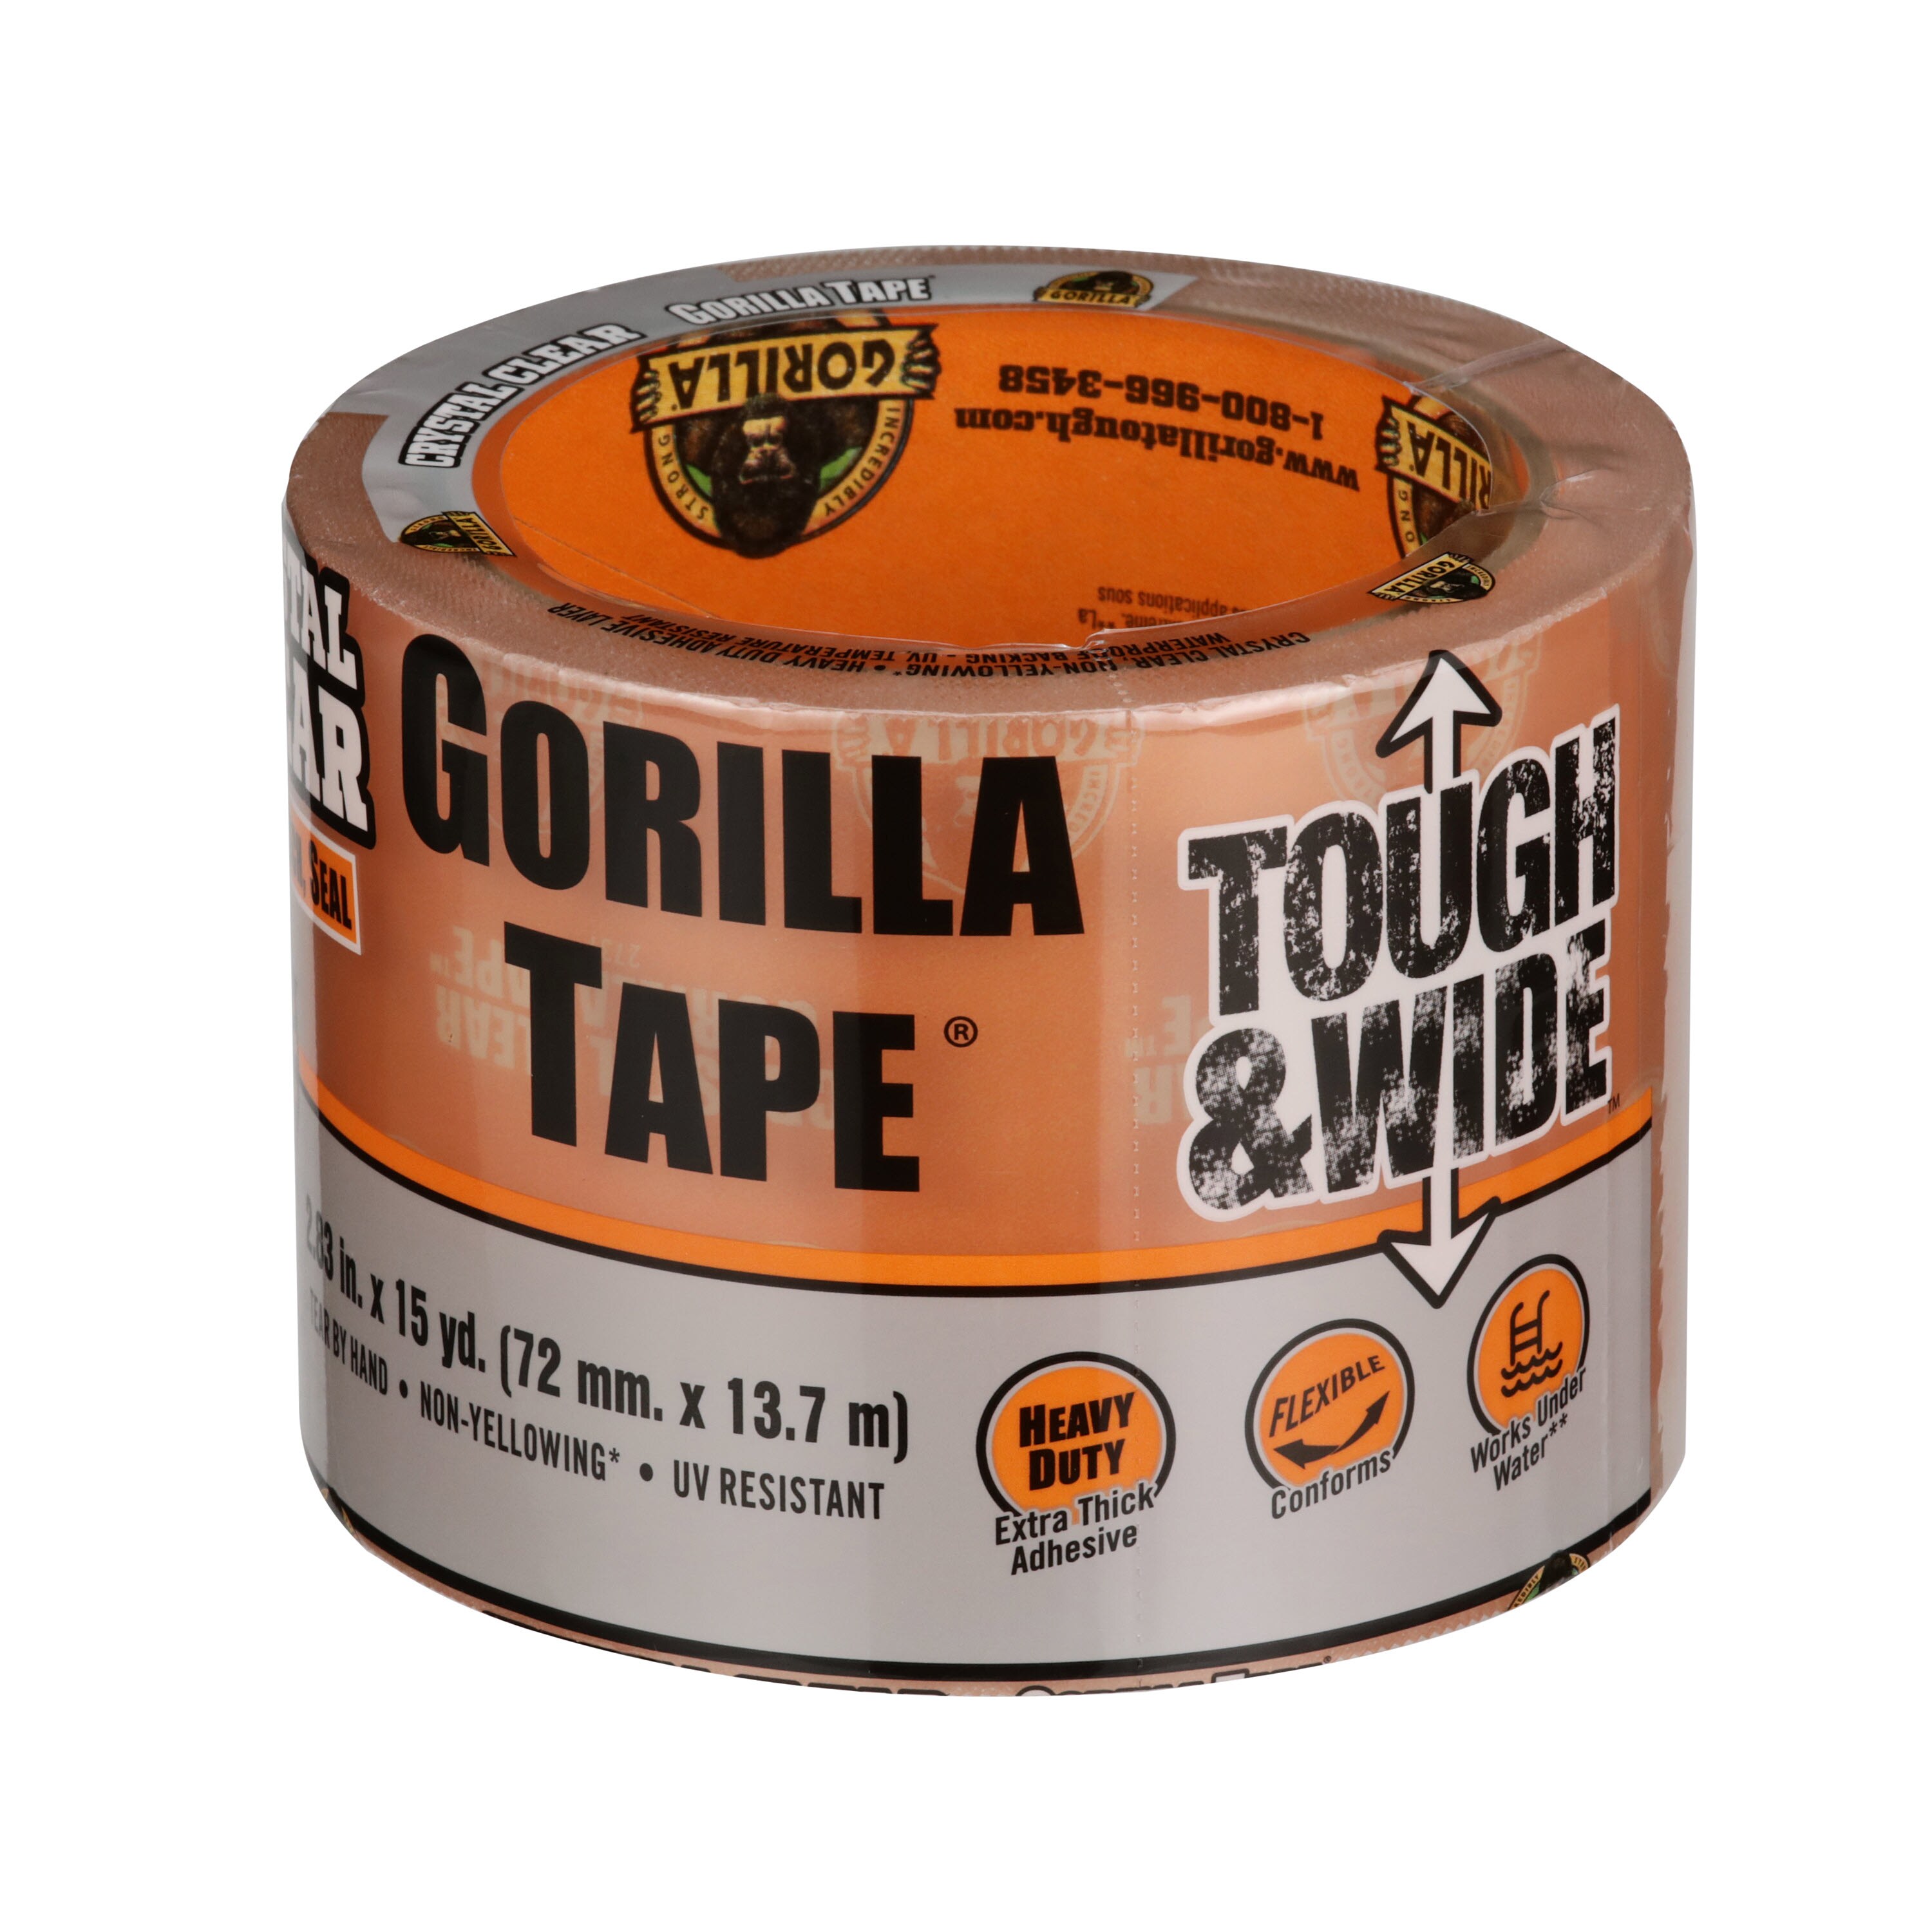 Gorilla Tape Range Duct Duct Gaffer Tape Double Sided Repair Waterproof Tape 